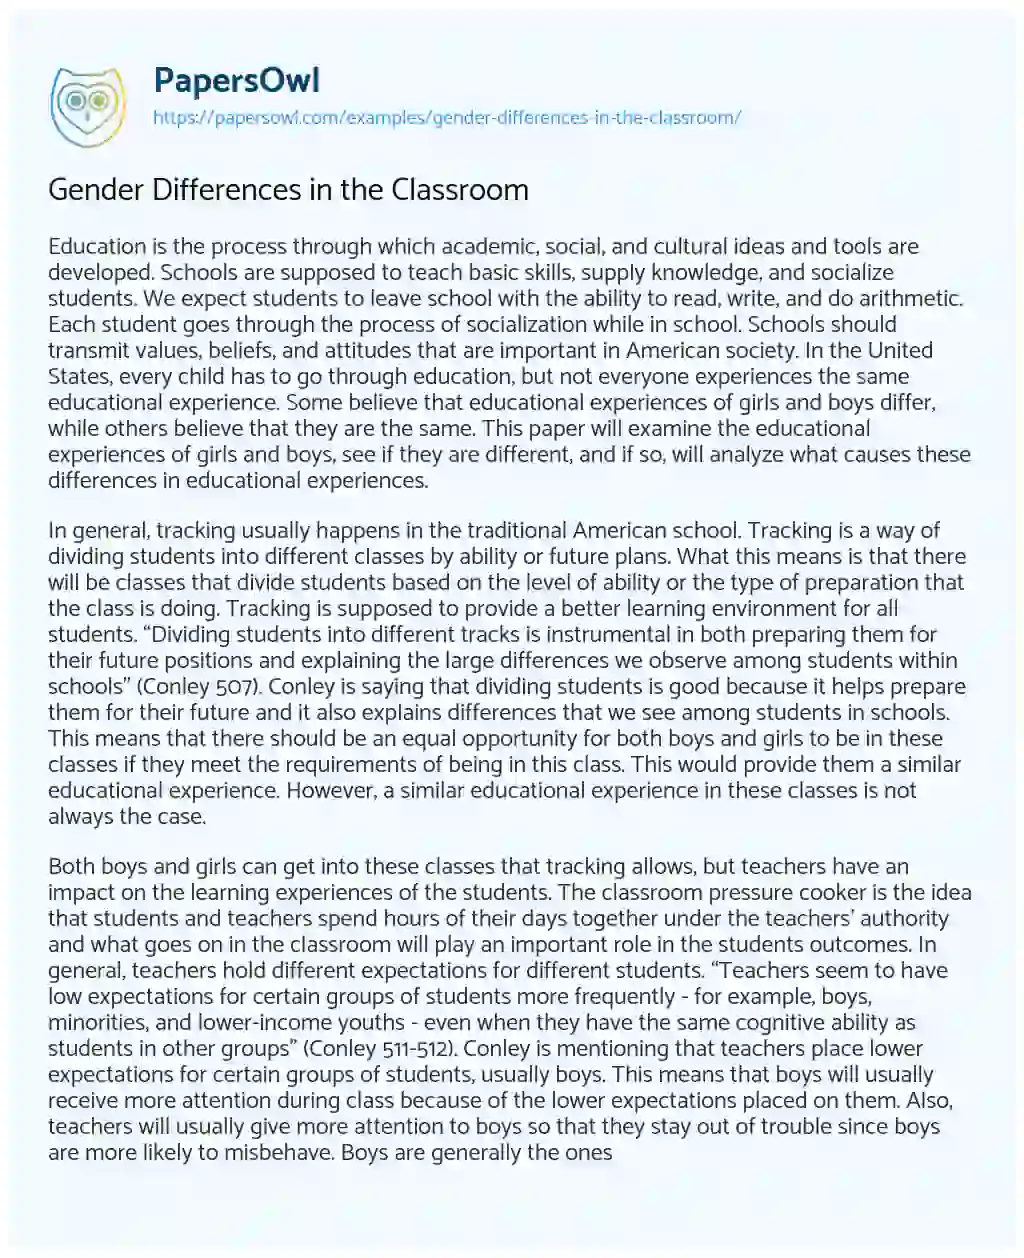 Gender Differences in the Classroom essay